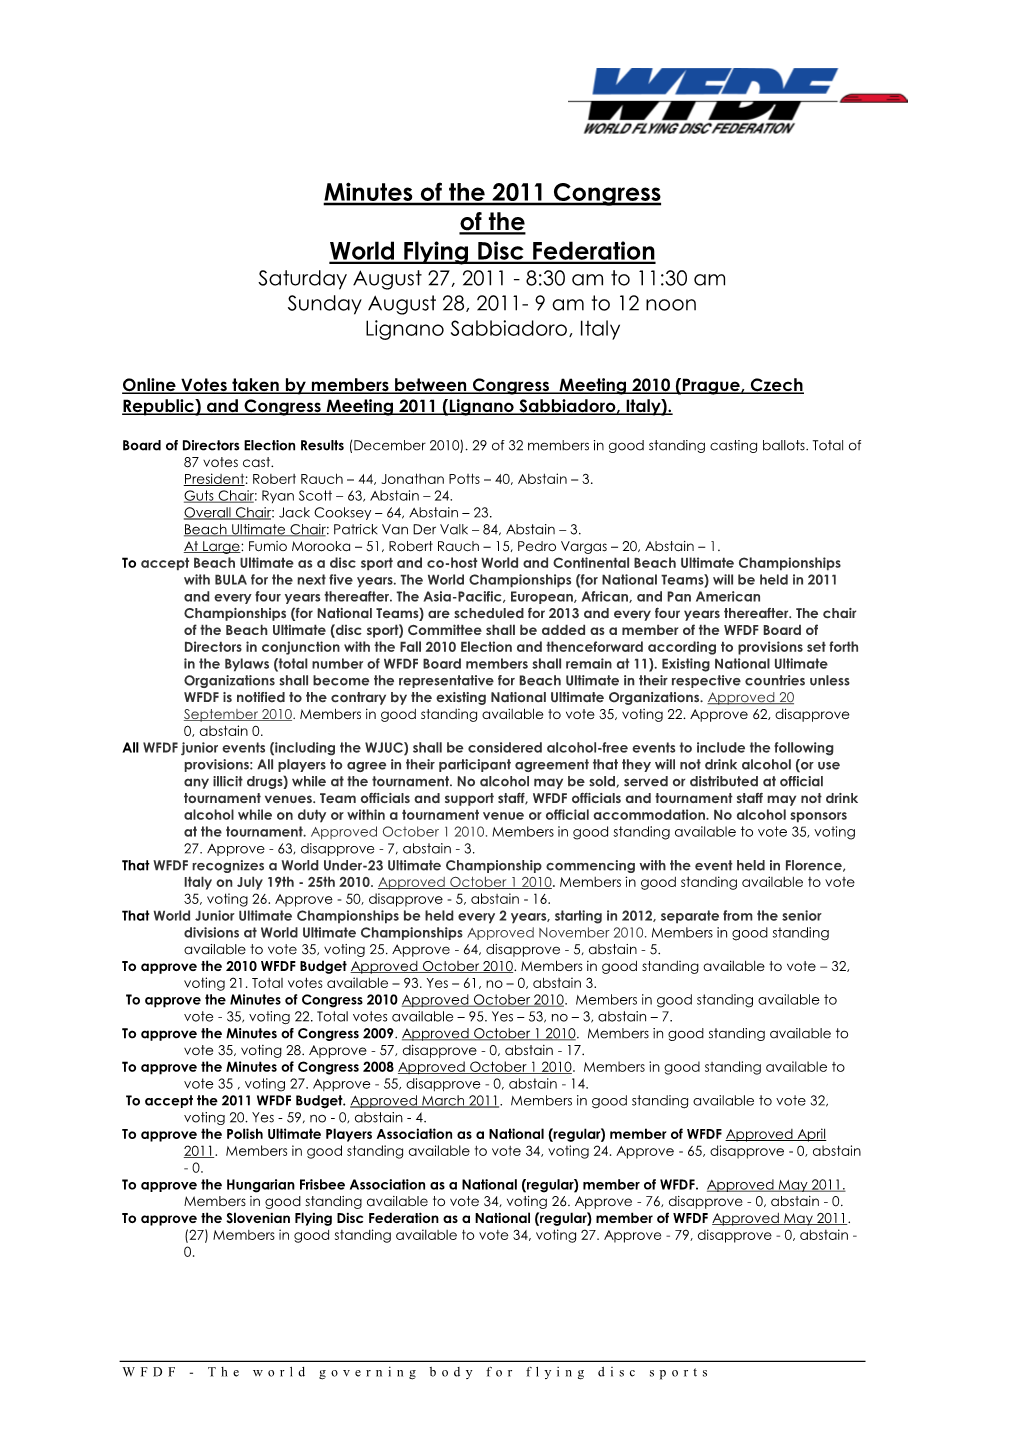 Minutes of the 2011 Congress of the World Flying Disc Federation